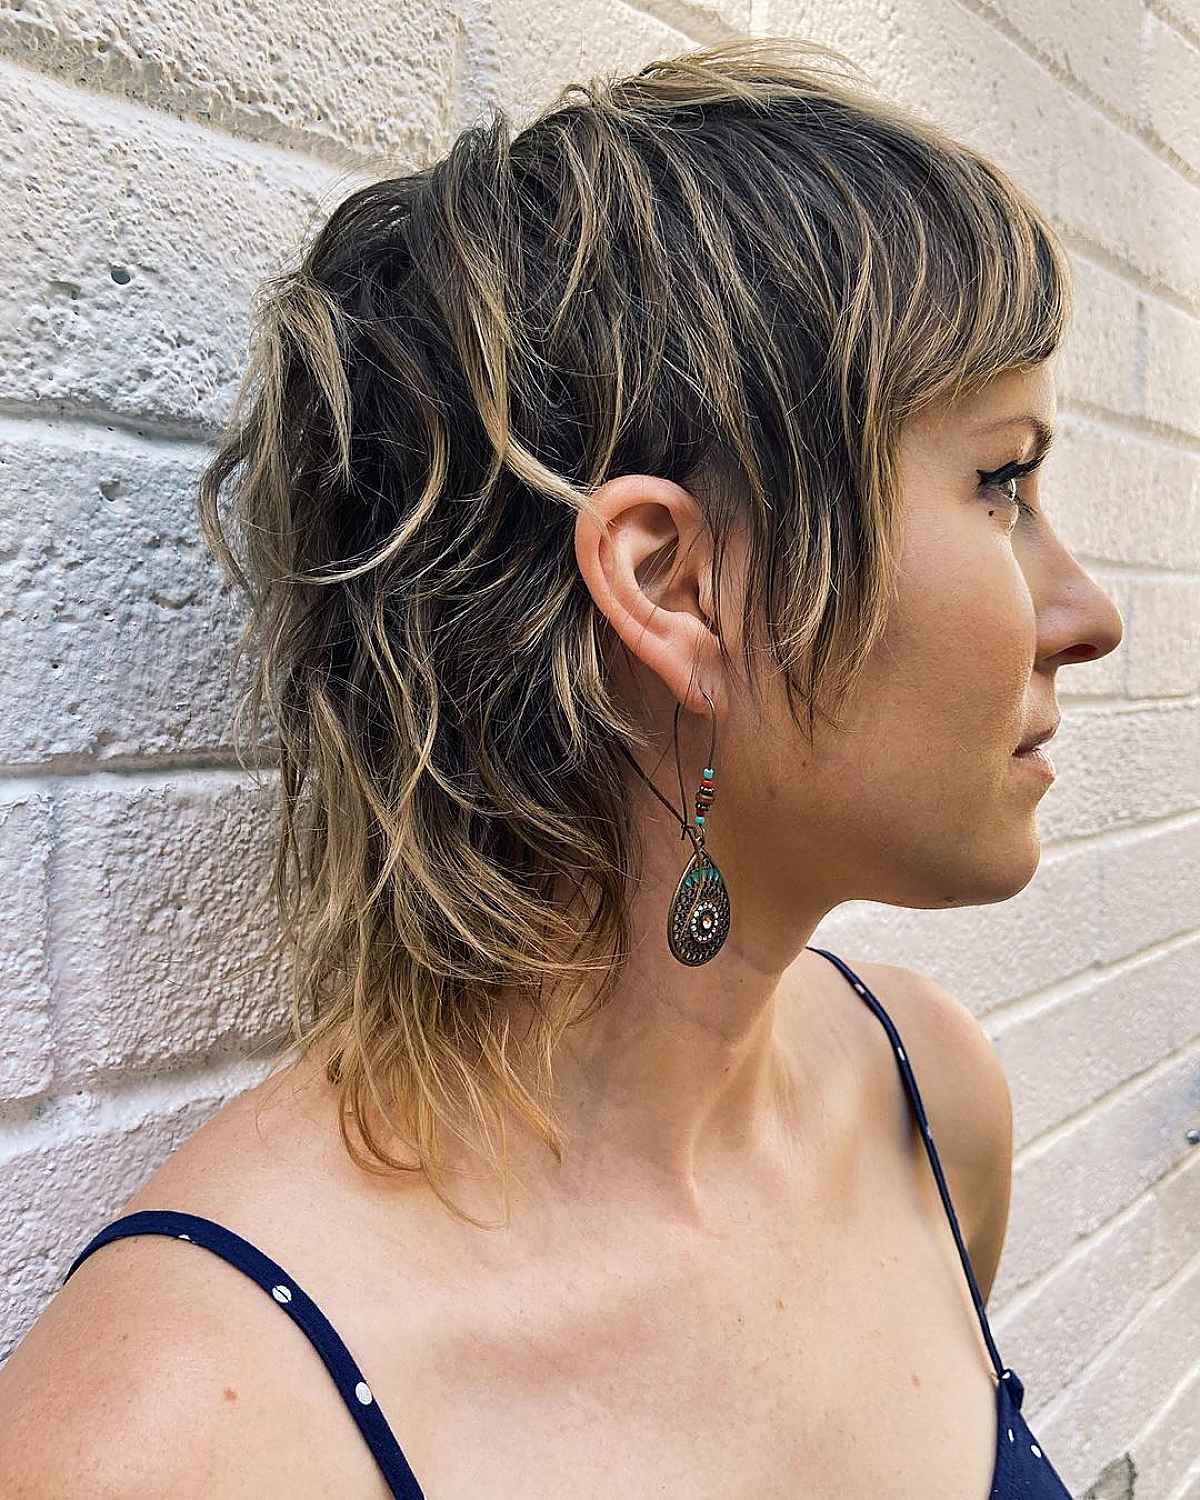 Miley Cyrus-Inspired Pixie Mullet